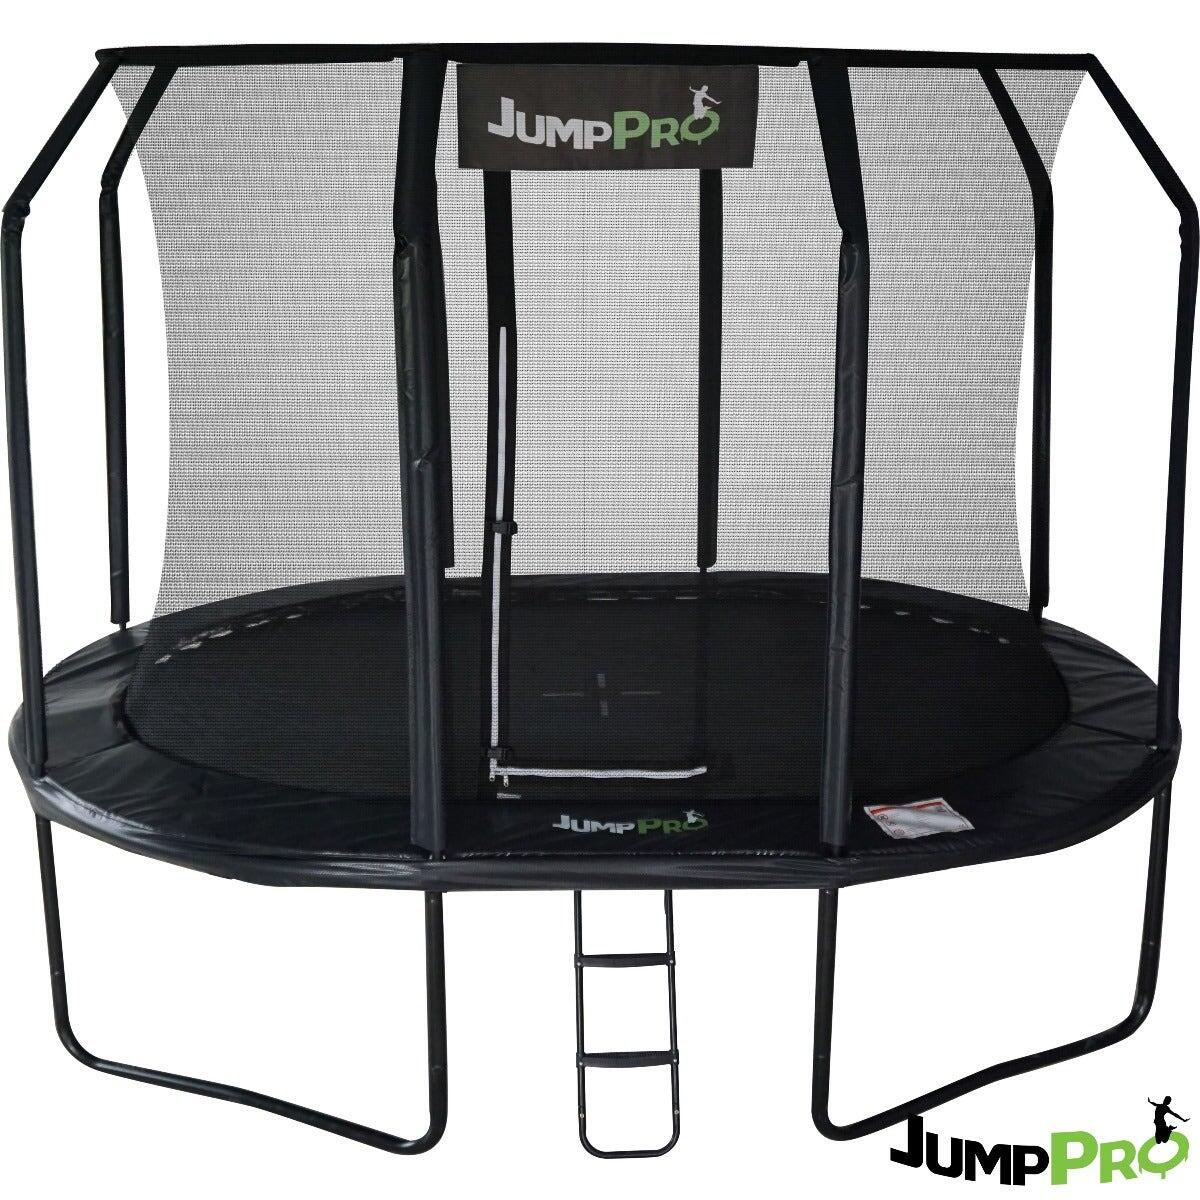 JUMPPRO 12ft x 8ft JumpPRO™ Xcel Black Oval Trampoline with Enclosure